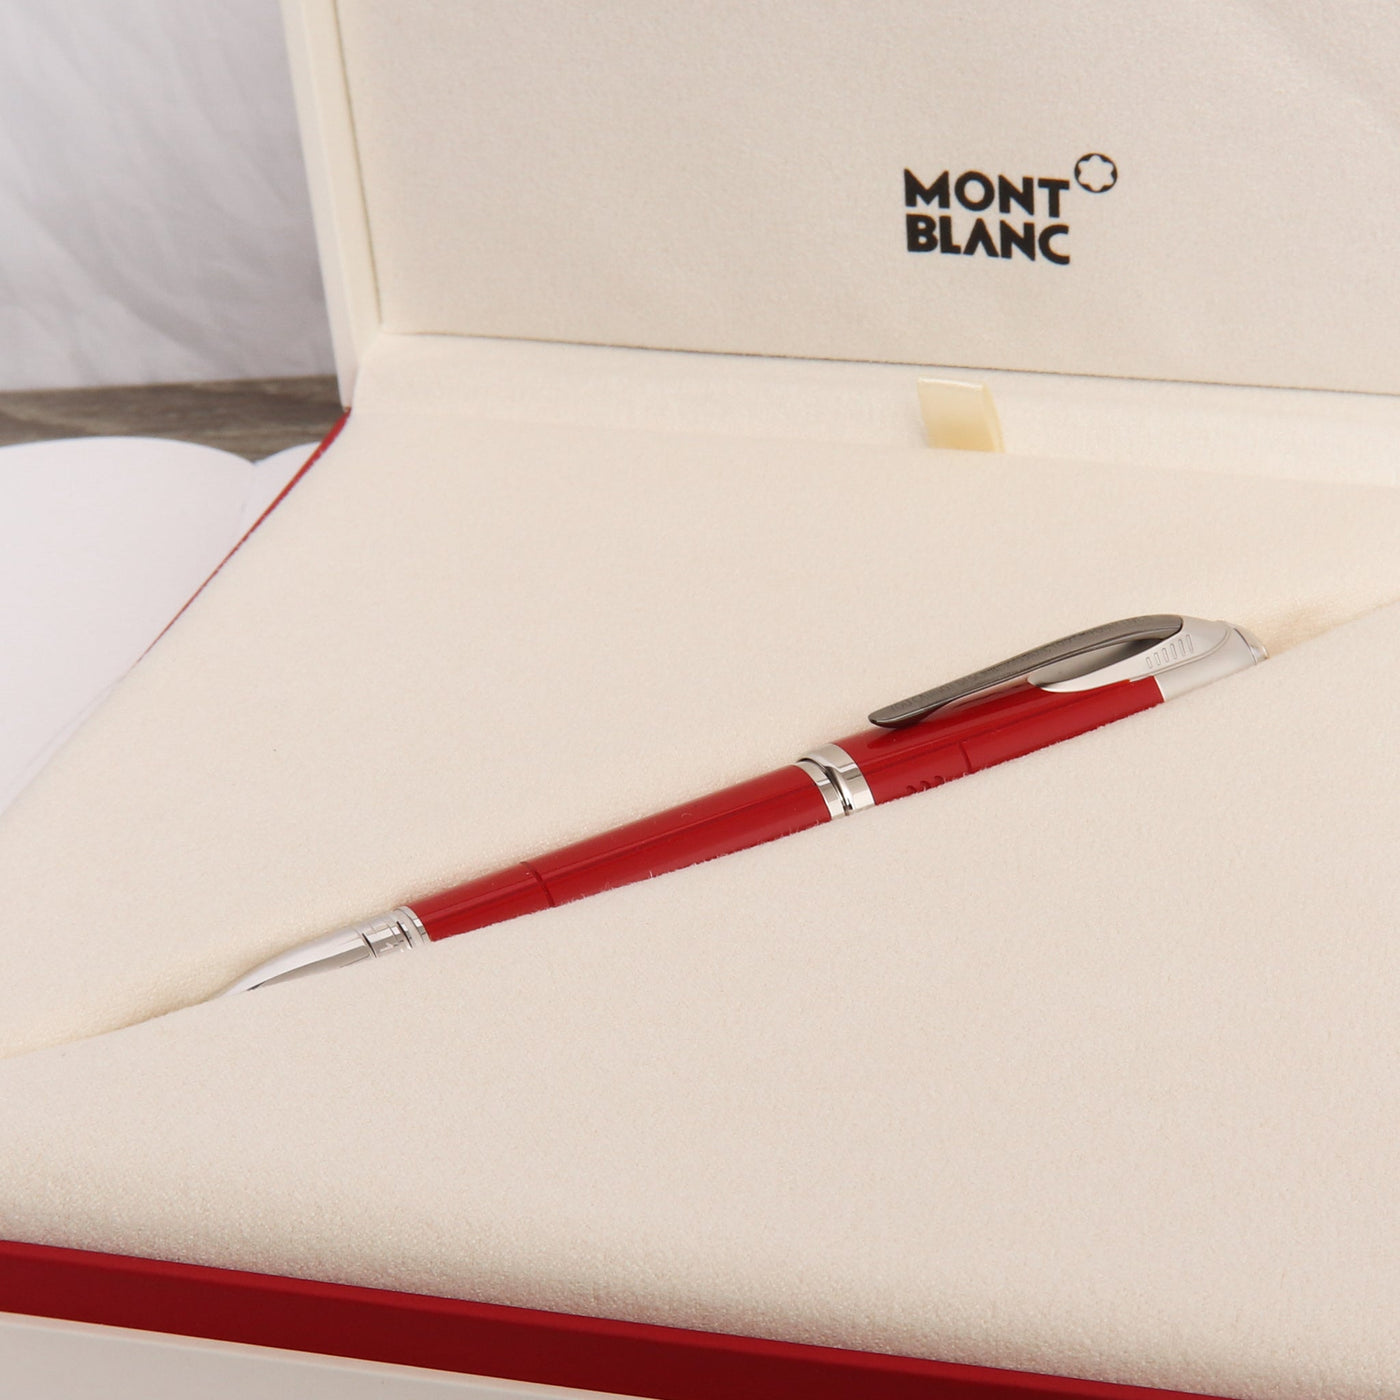 Montblanc Great Characters Enzo Ferrari Rollerball Pen Packaging